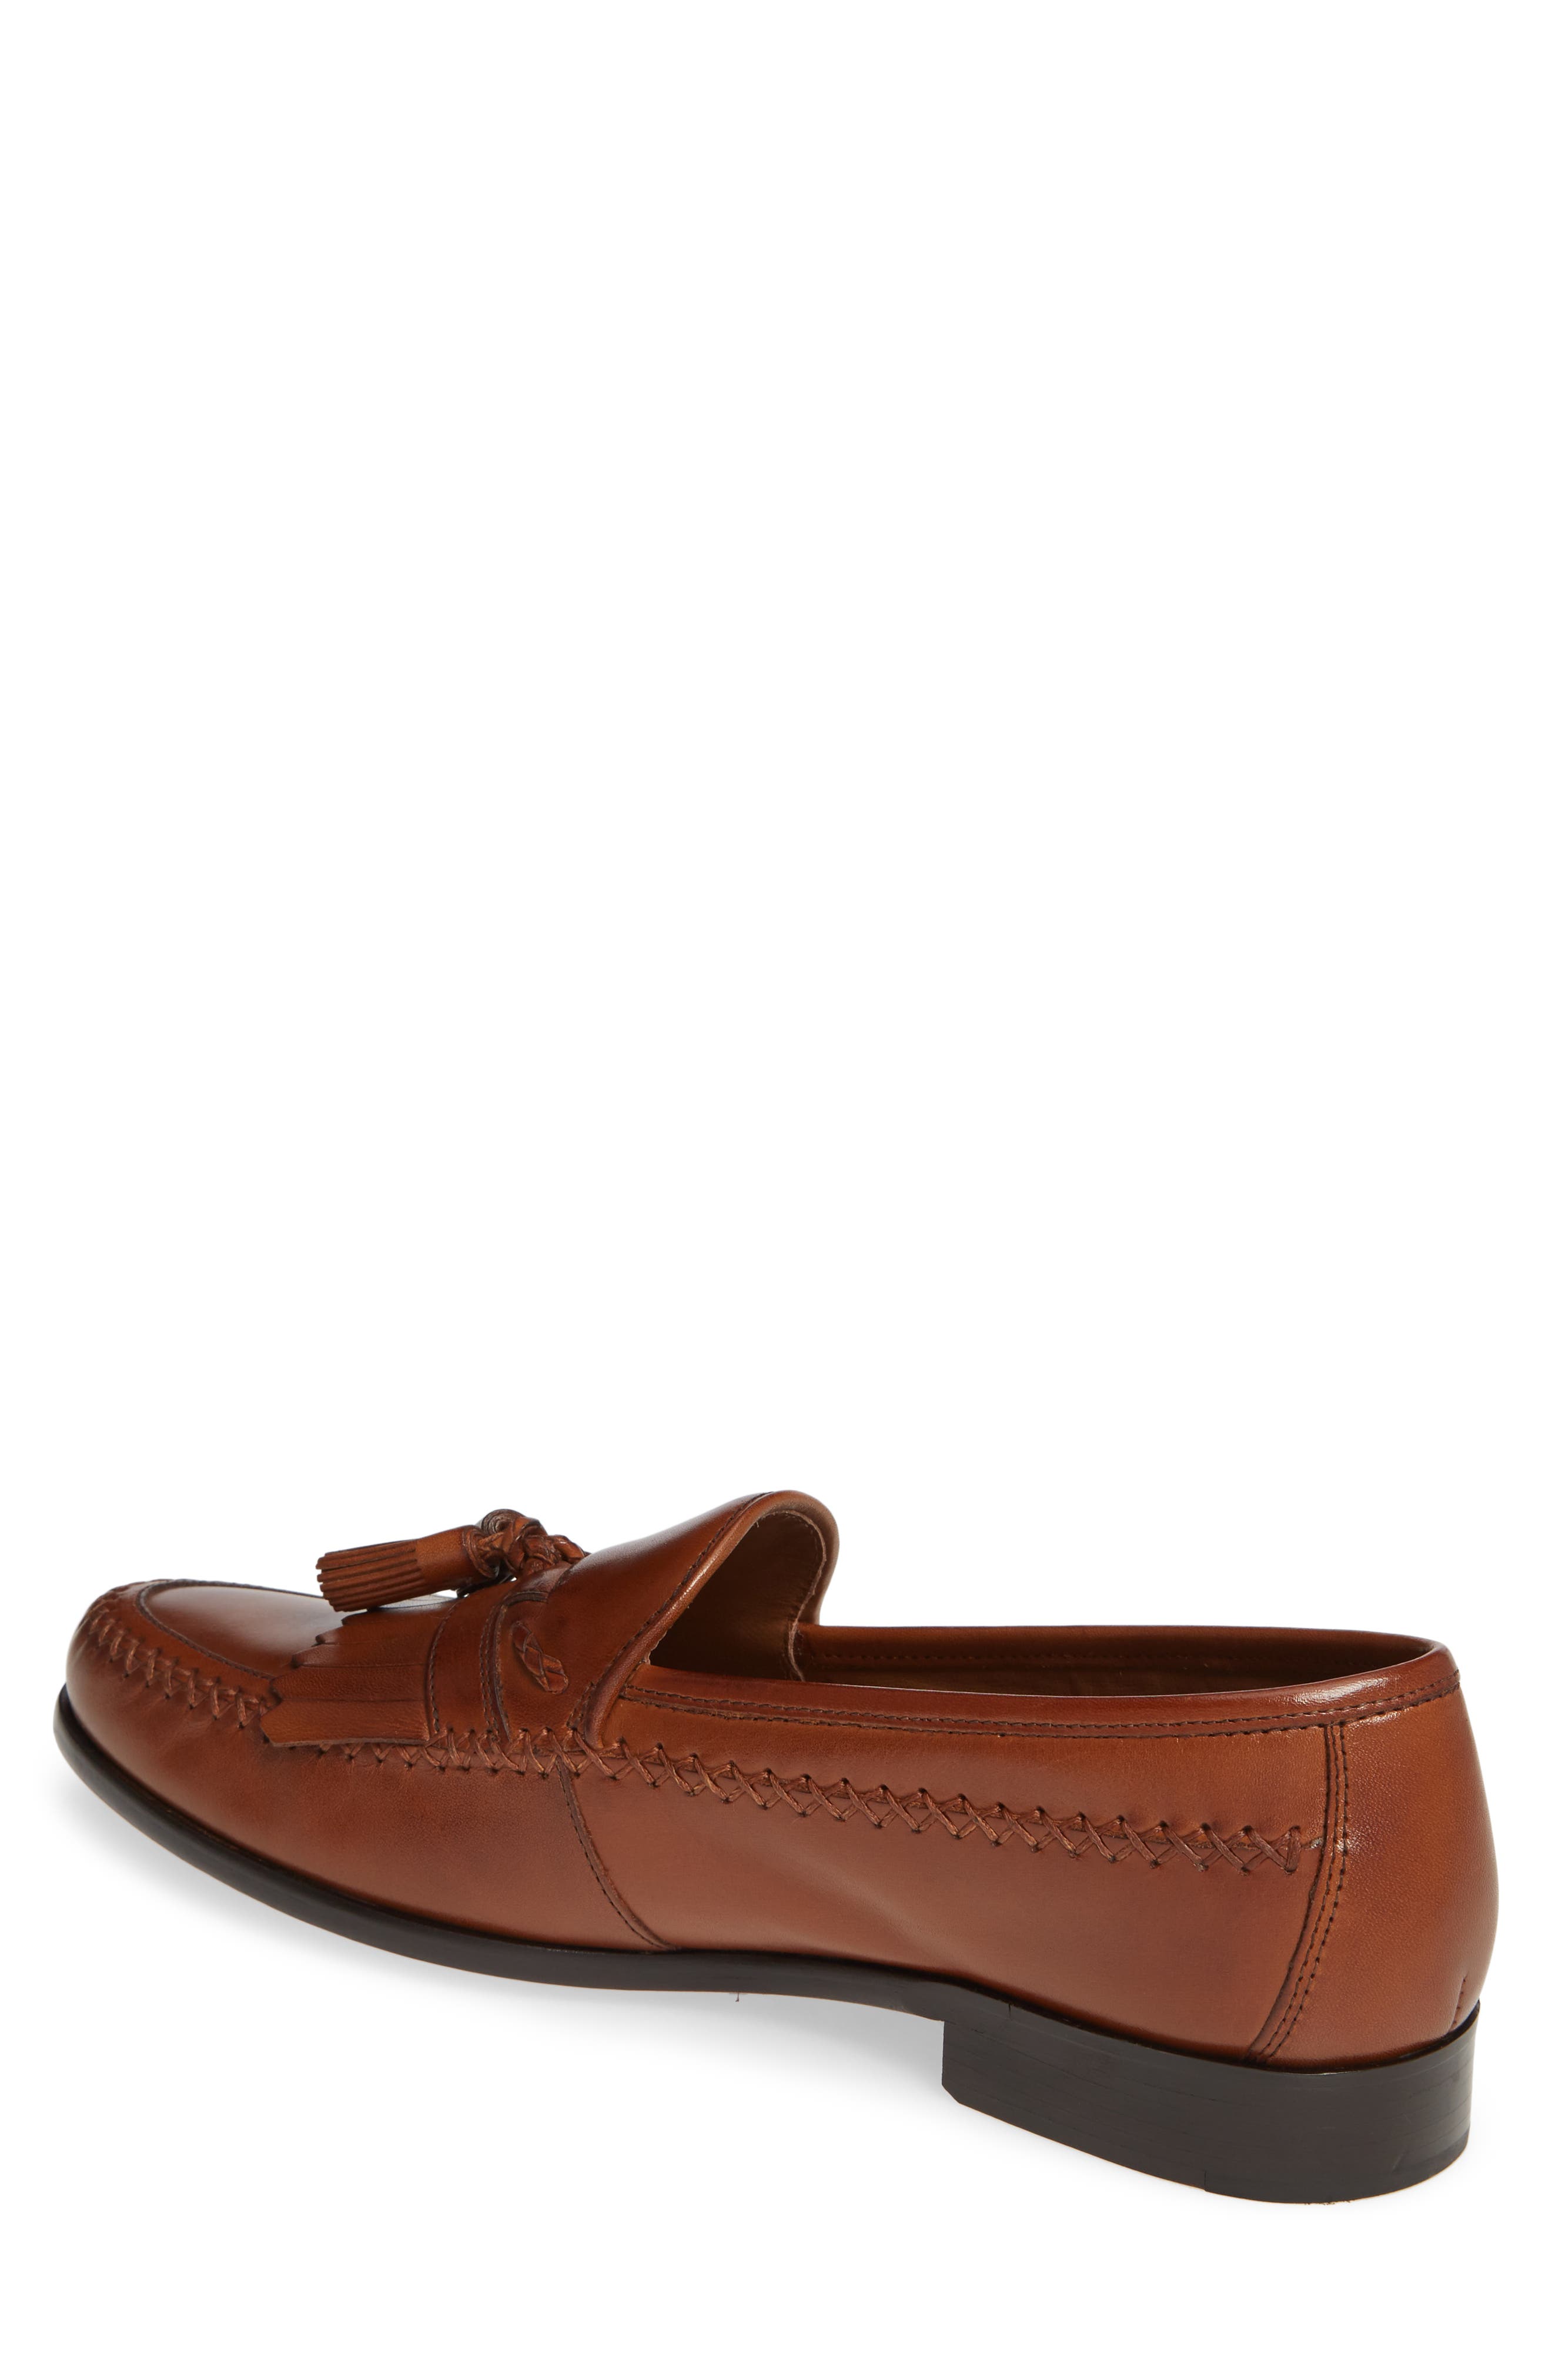 domani shoes by johnston and murphy